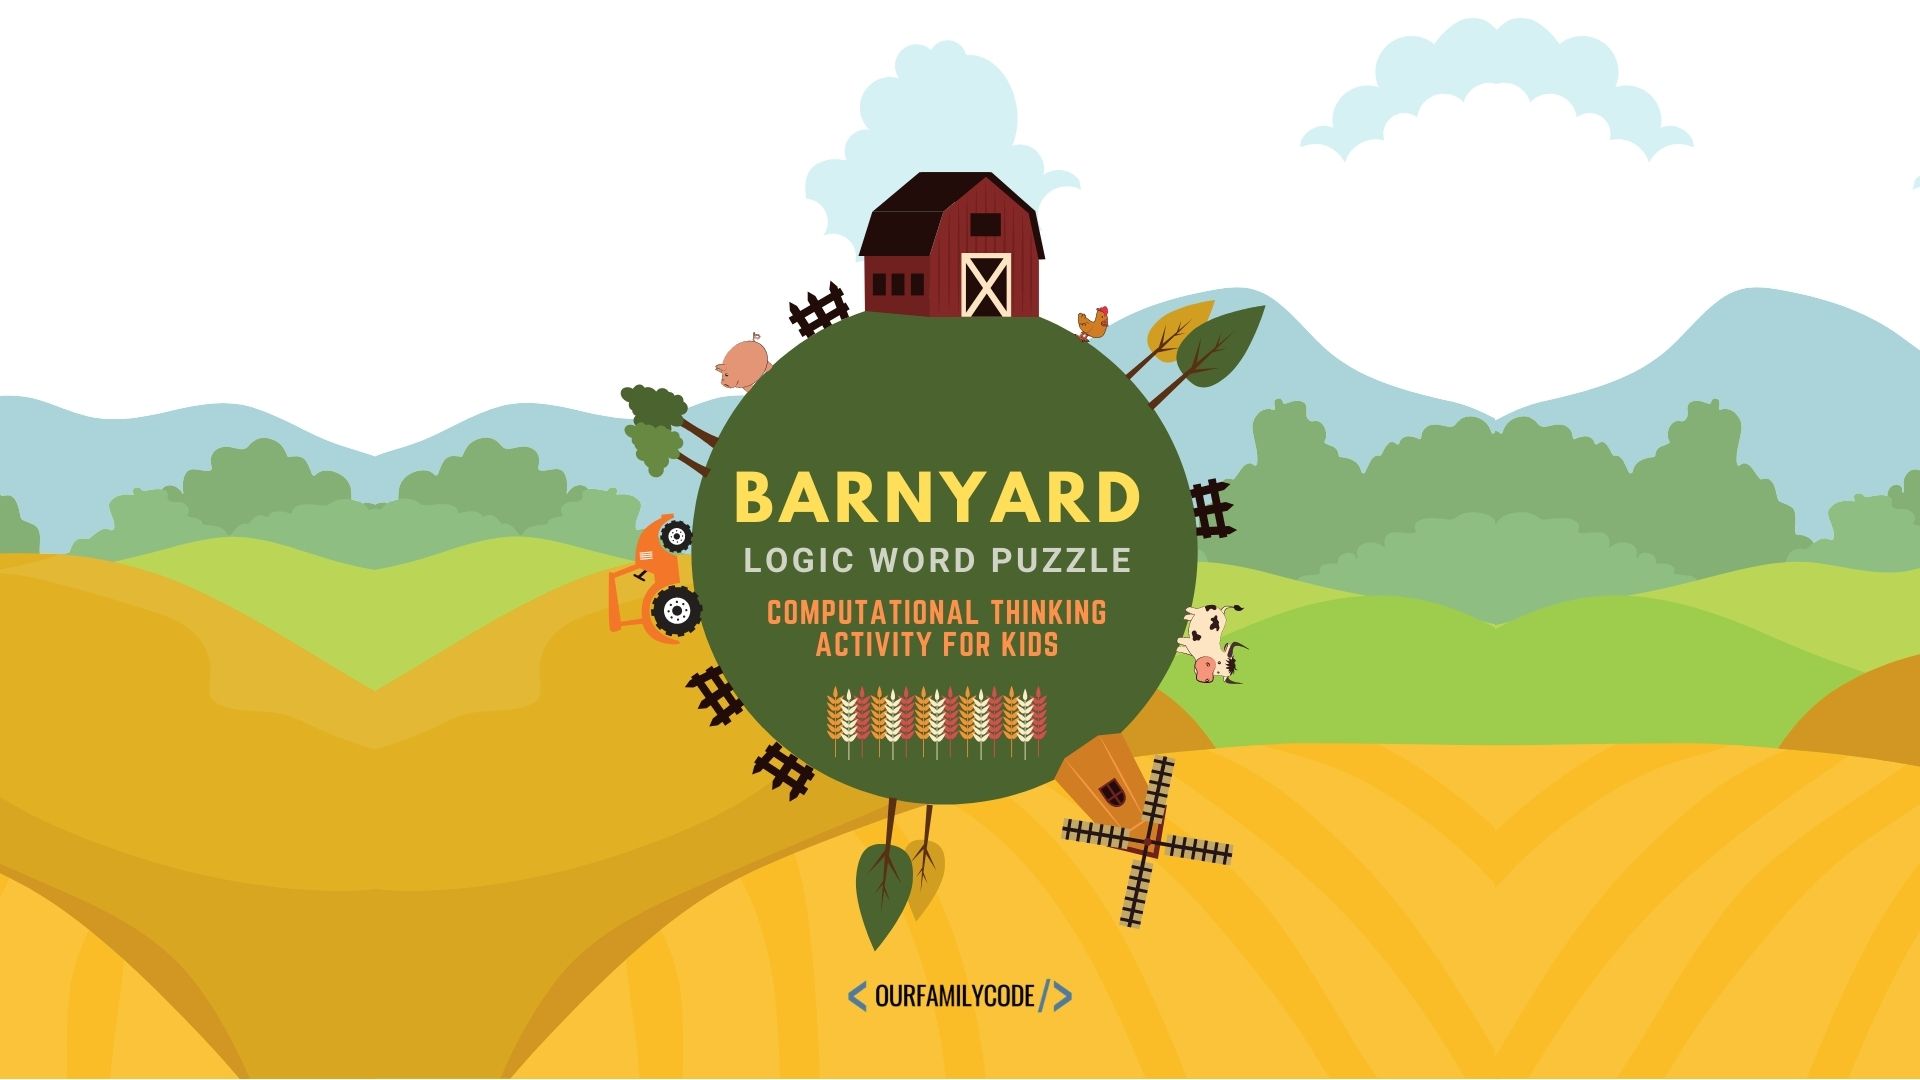 This barnyard logic word puzzle activity is a way for kids to use logical thinking and pattern matching paired with spatial recognition and spelling. #teachkidstocode #logicpuzzles